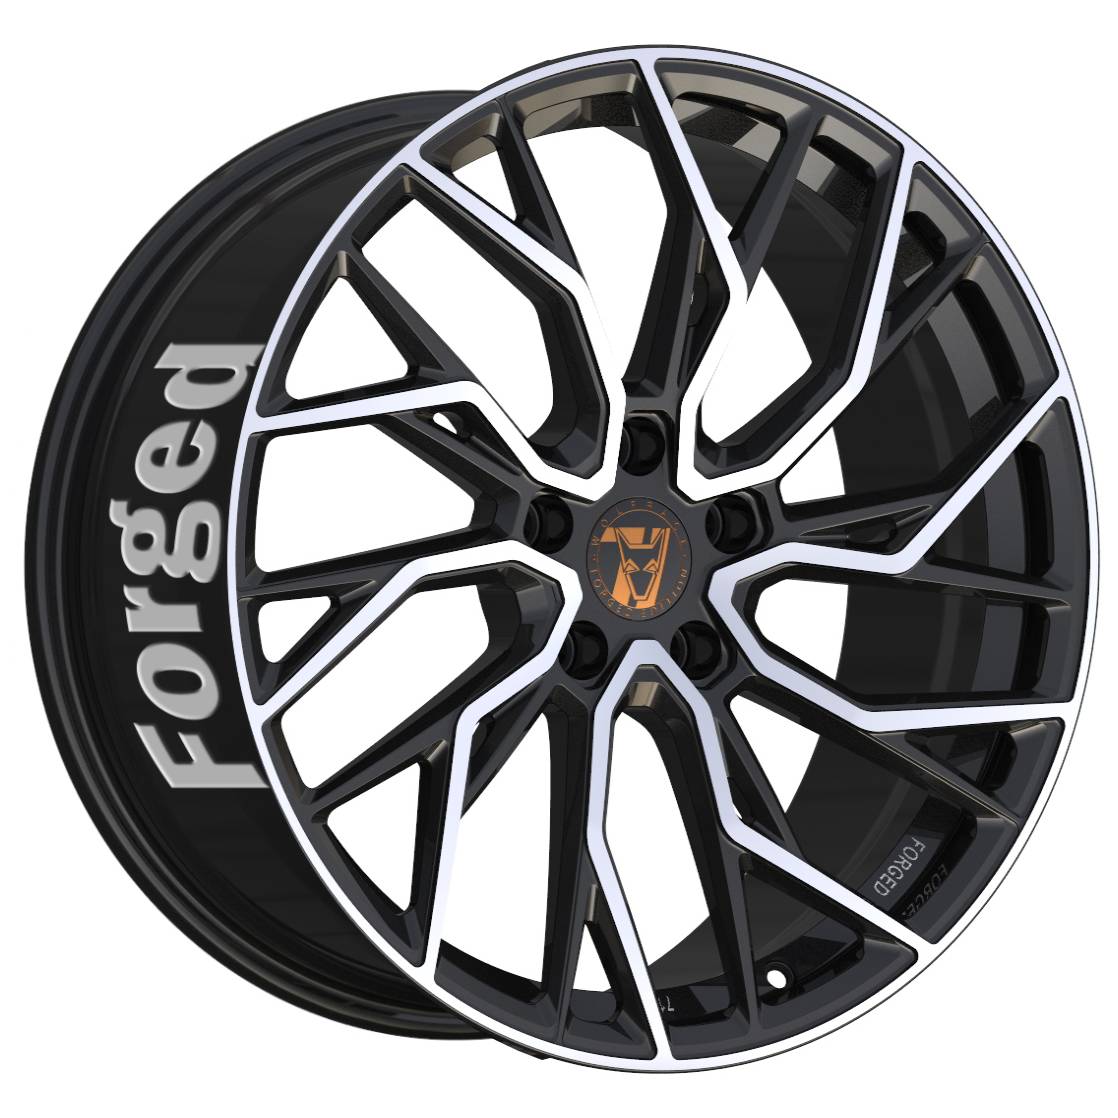 Jantes alu Demon Wheels 71 Forged Edition Voodoo Forged [13x23] -5x114.3- ET 35